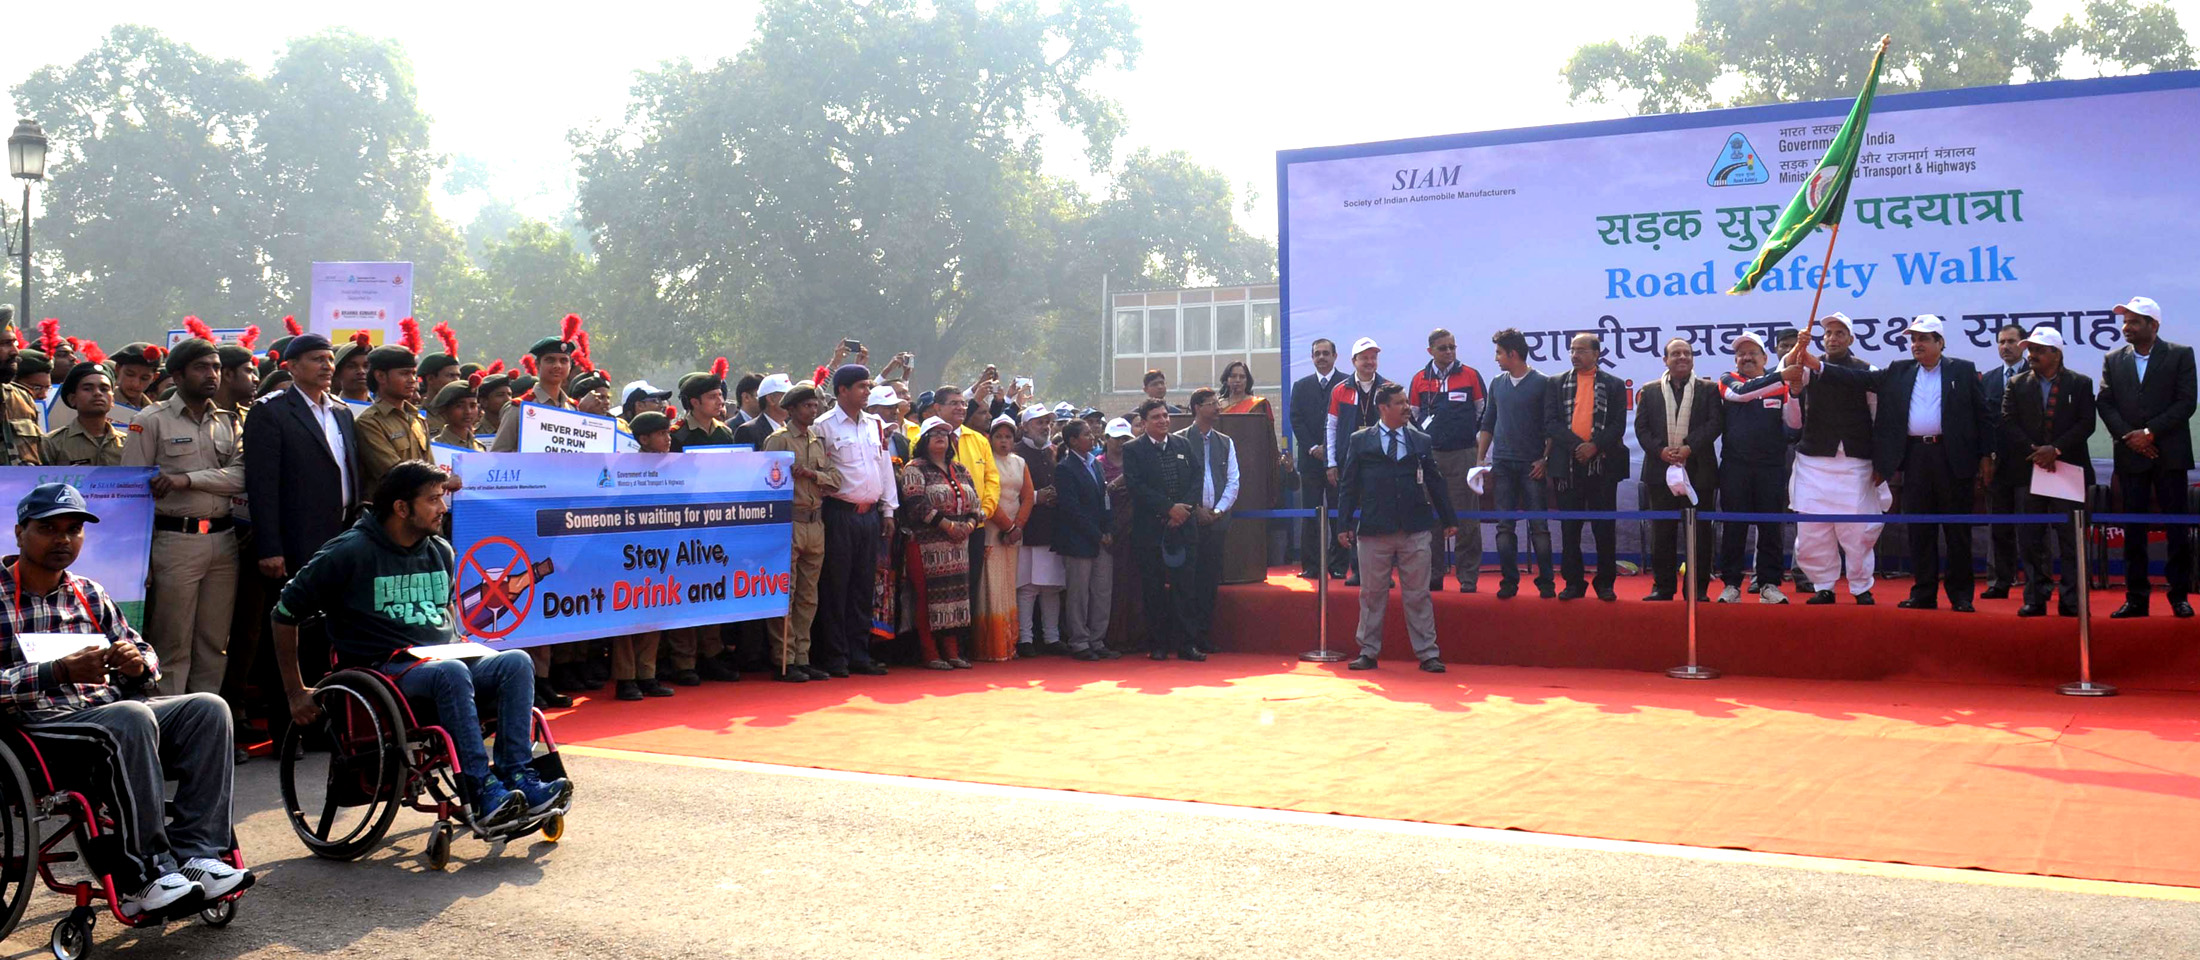 The Union Home Minister, Shri Rajnath Singh along with the Union Minister for Road Transport & Highways and Shipping, Shri Nitin Gadkari and the Union Minister for Science & Technology and Earth Sciences, Dr. Harsh Vardhan flagging off the Road Safety Walk, in New Delhi on January 11, 2016.